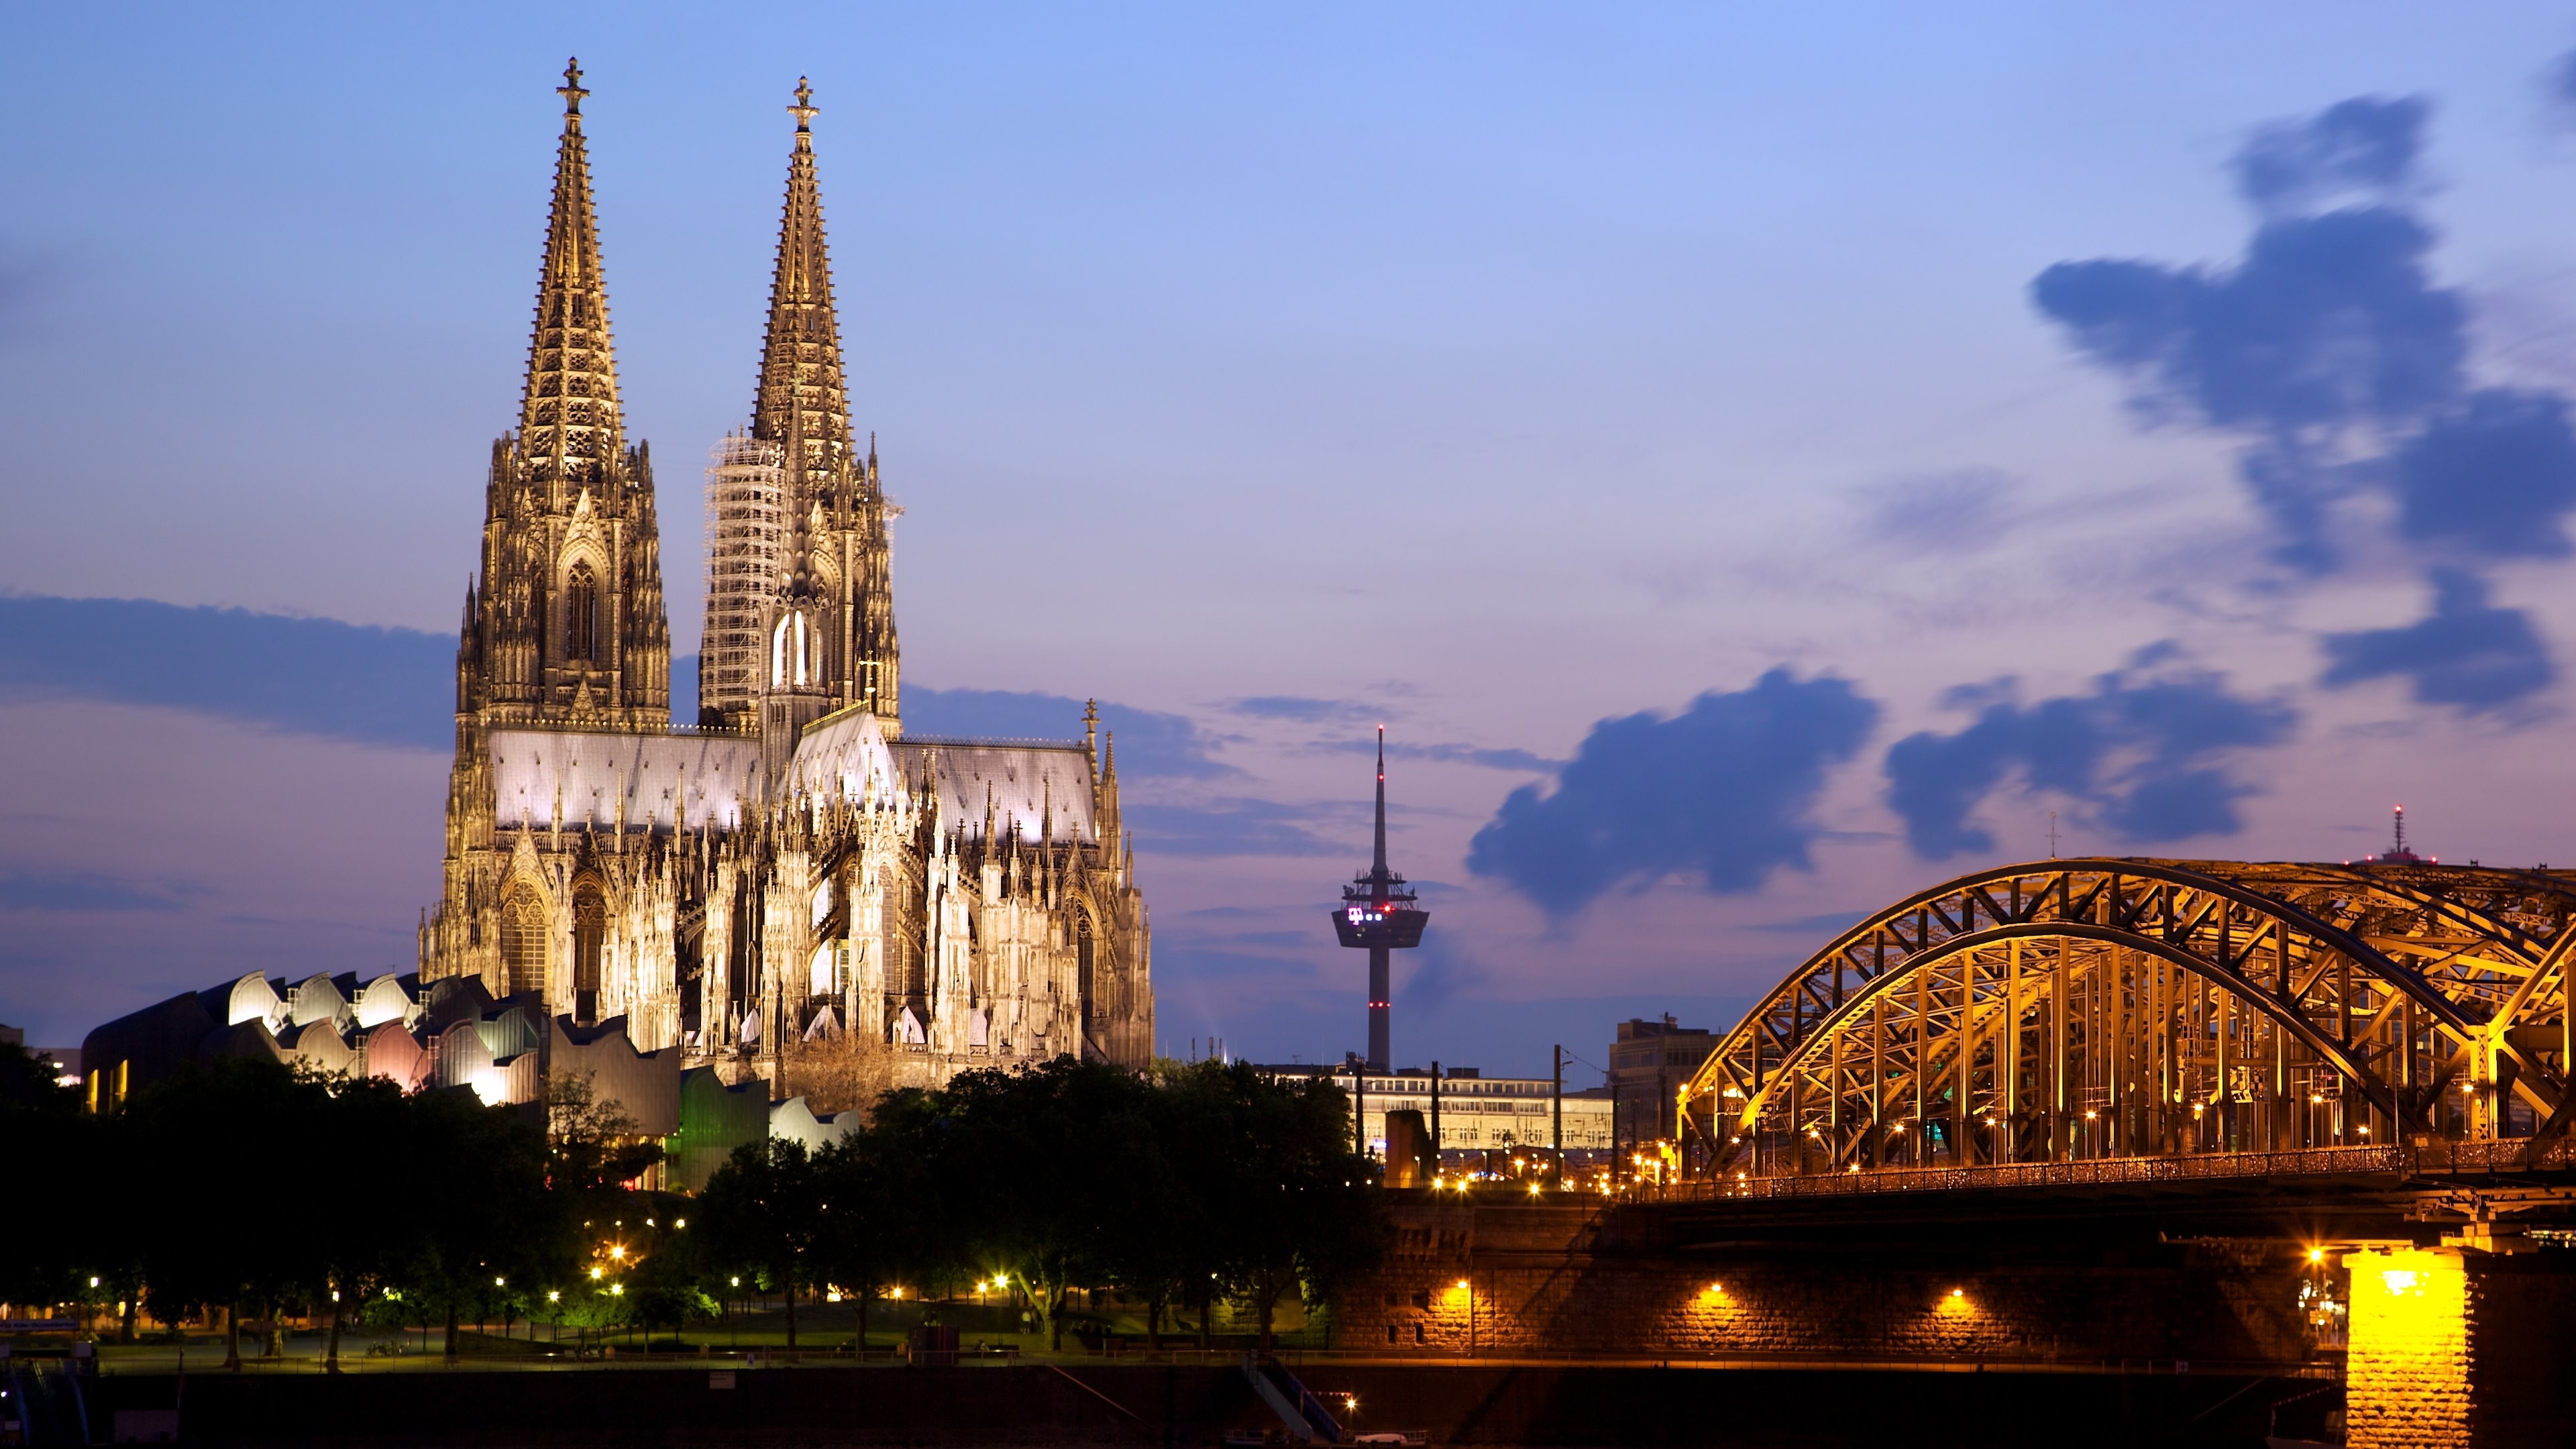 Free download Cologne Cathedral in Germany Wallpaper New HD Wallpaper [3840x2160] for your Desktop, Mobile & Tablet. Explore Cologne Germany Wallpaper. Germany Flag Wallpaper, Germany 2015 Wallpaper, Berlin Germany Wallpaper